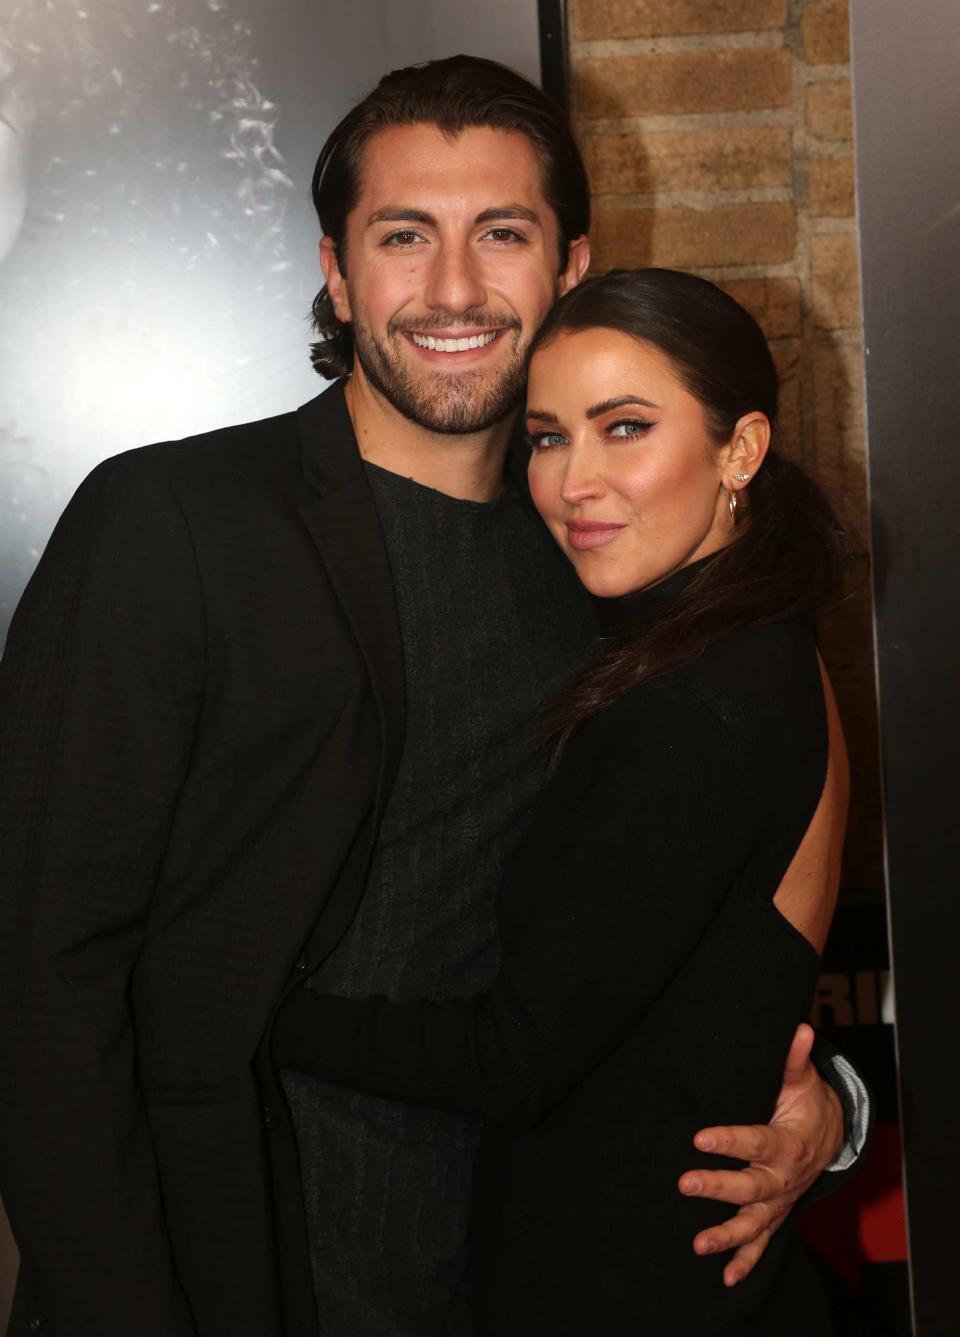 Jason Tartick and Kaitlyn Bristowe and pose at the 25th Anniversary of "Chicago" on Broadway at The Ambassador Theater on November 16, 2021 in New York City